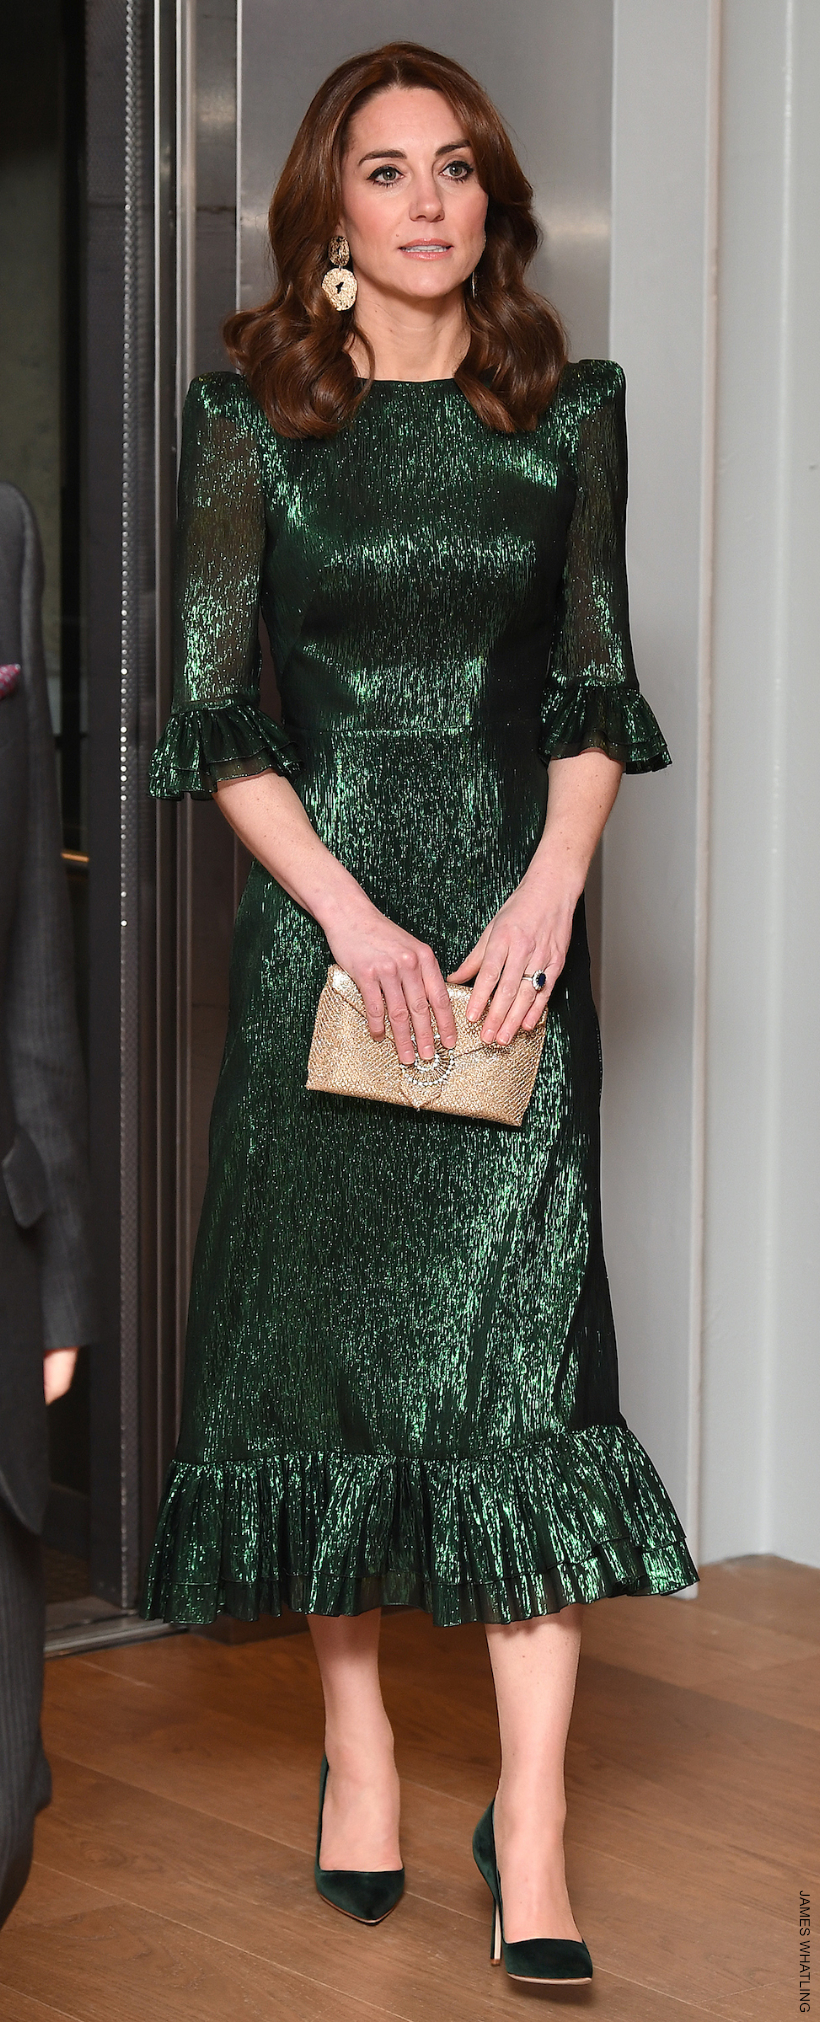 Kate Middleton in a striking green shimmery dress by The Vampire's Wife.  Vogue called this a 'major moment in royal dressing.'